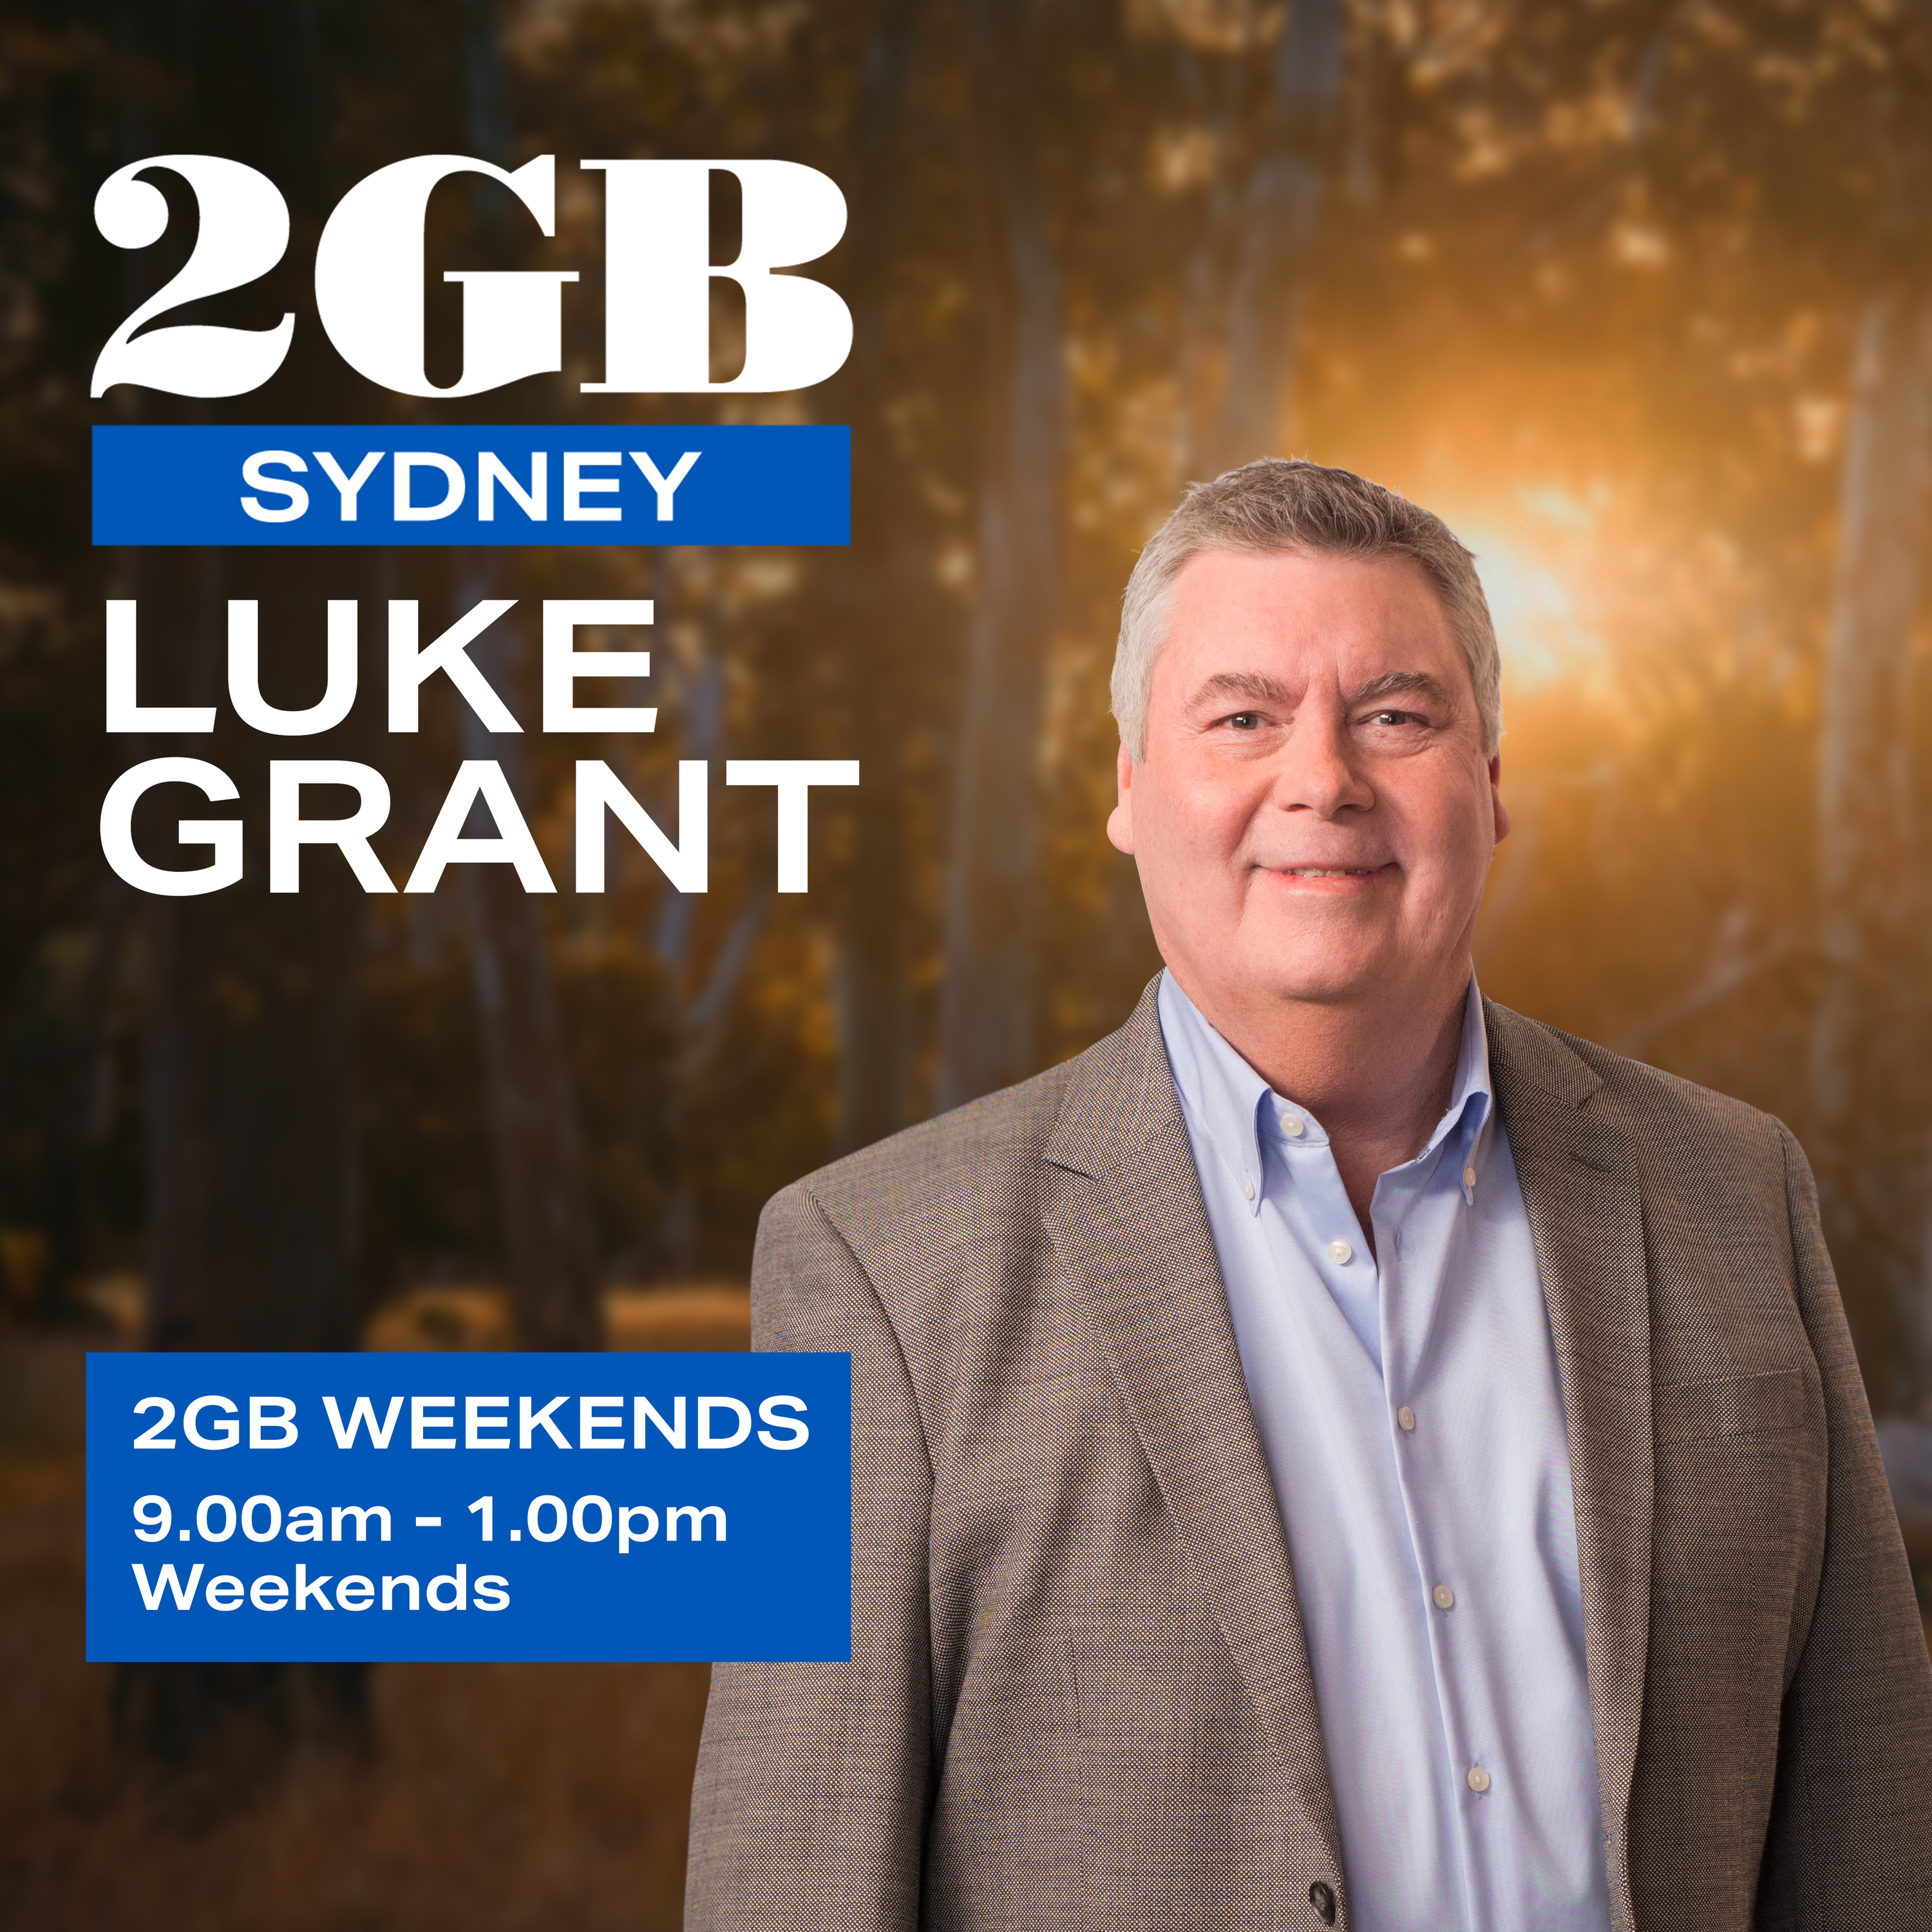 Weekends with Luke Grant - Saturday, 17th February